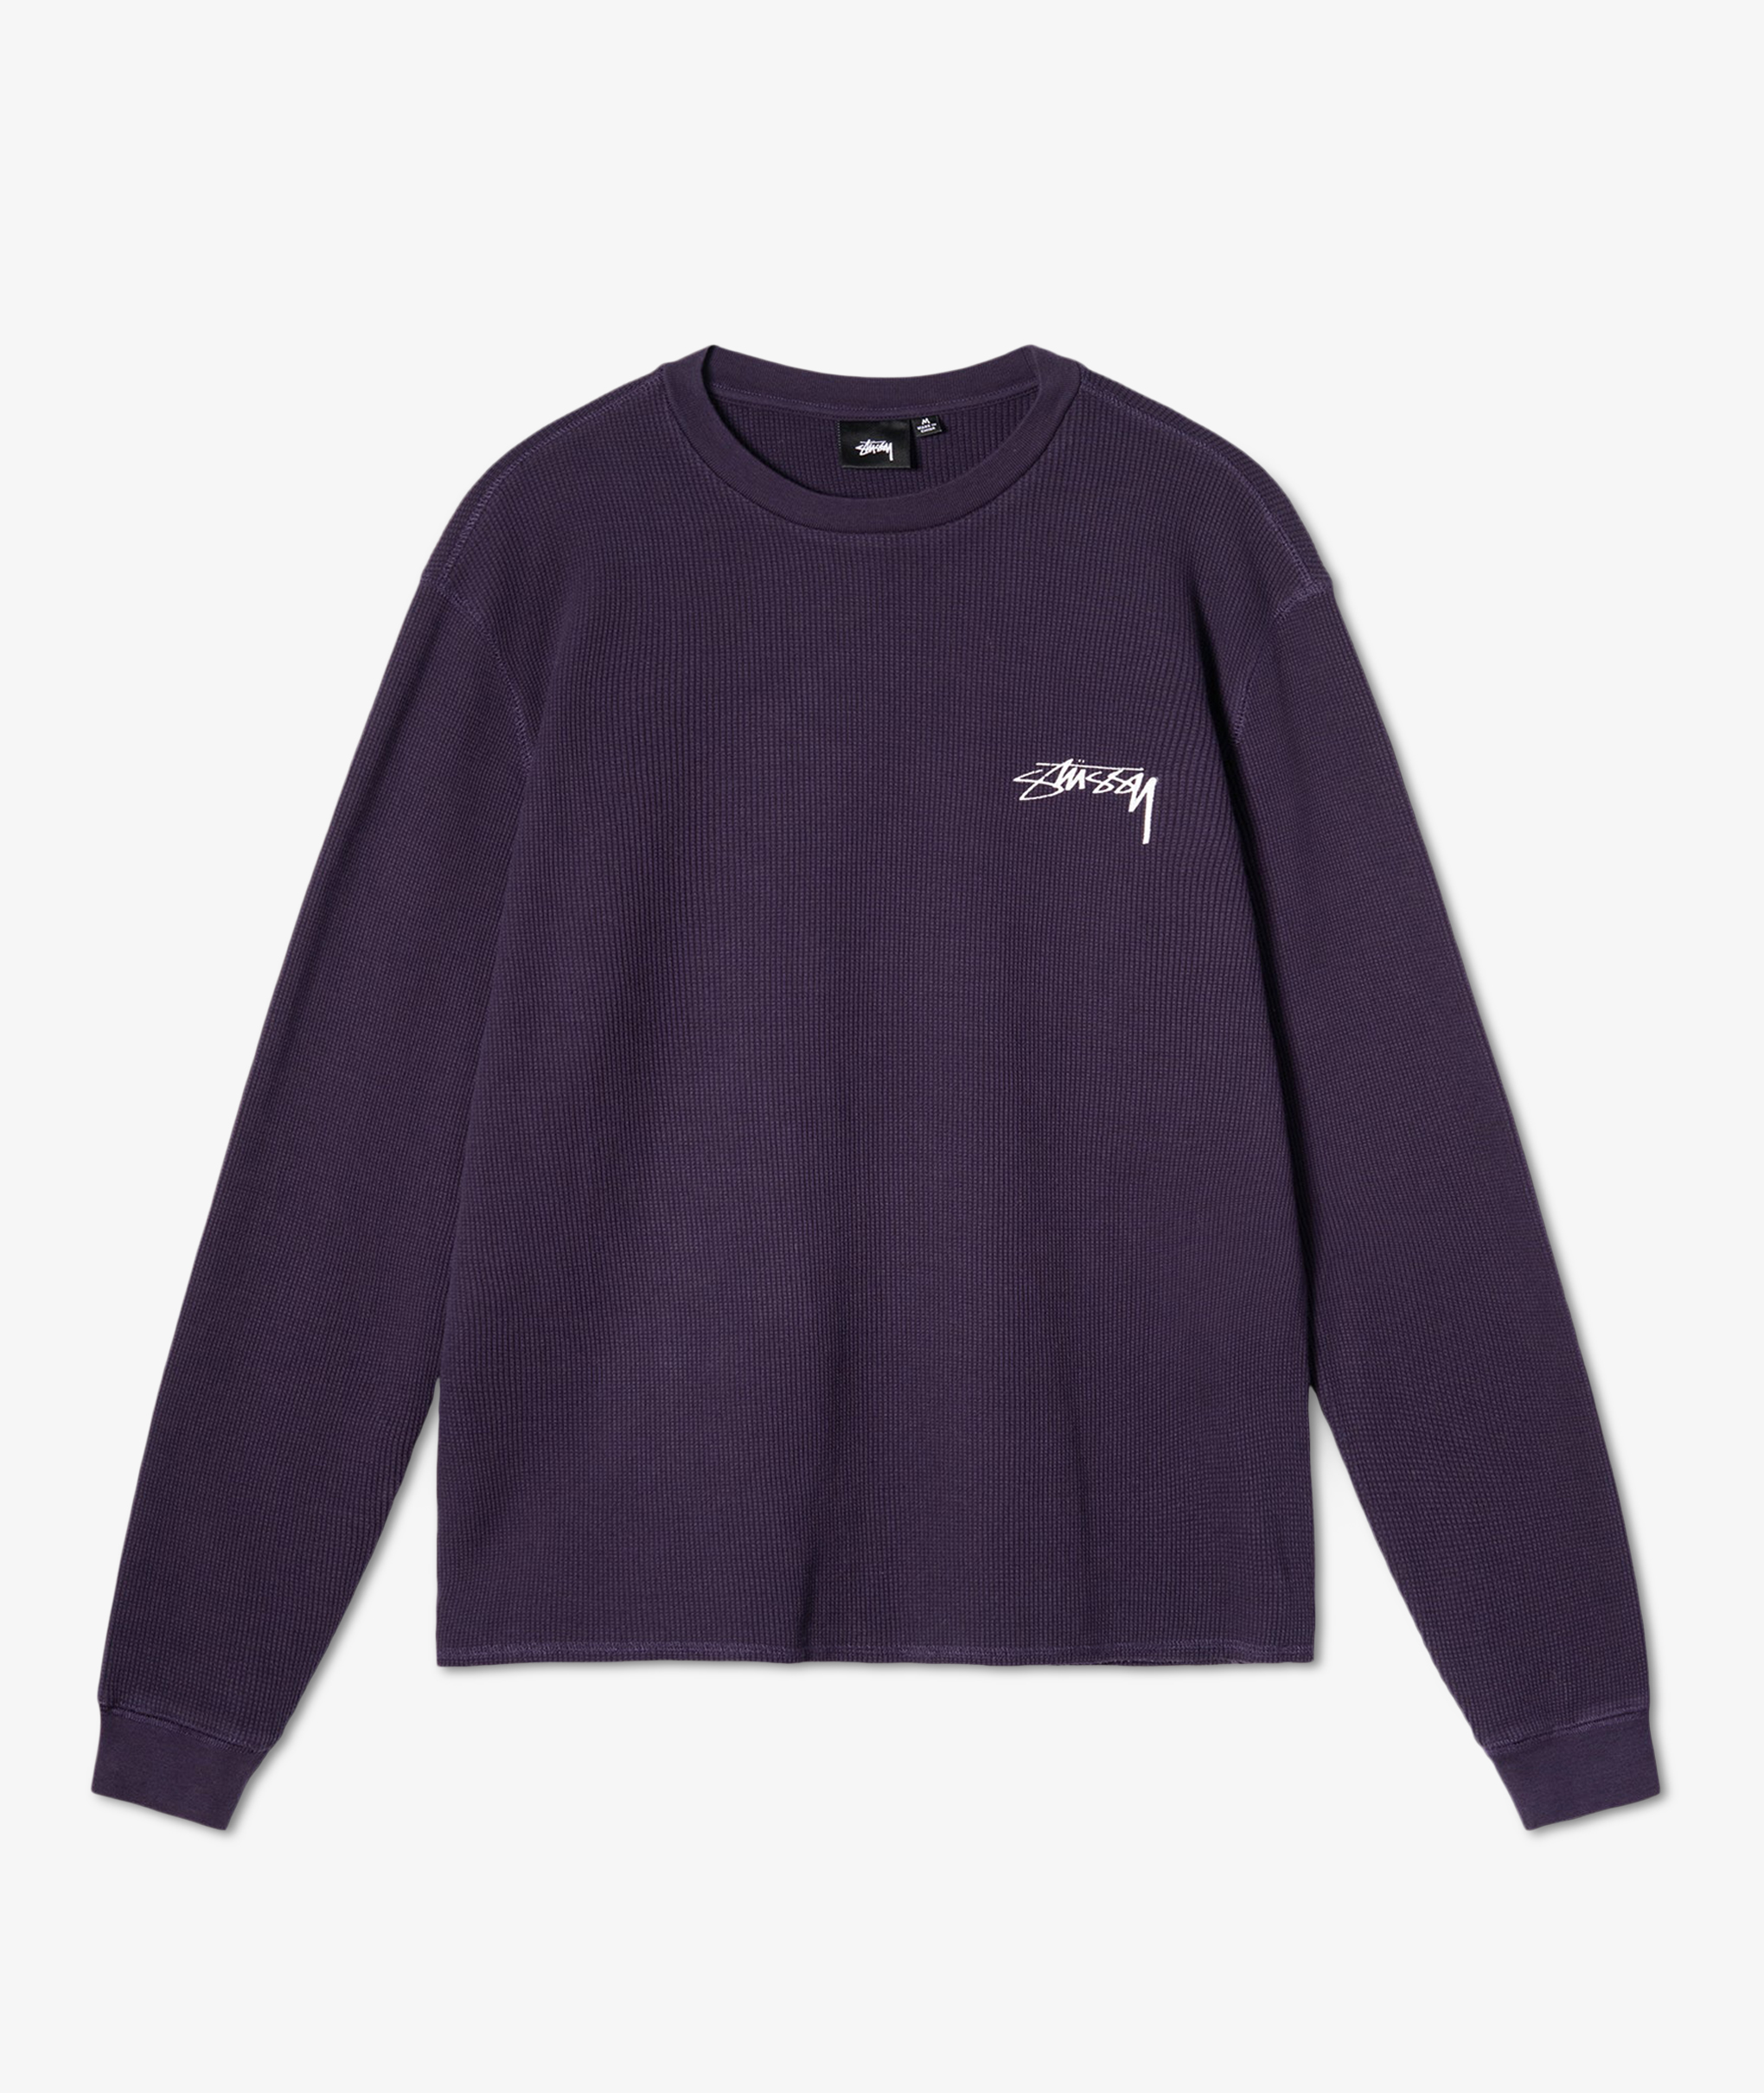 Norse Store | Shipping Worldwide - Stussy LS Thermal - Purple